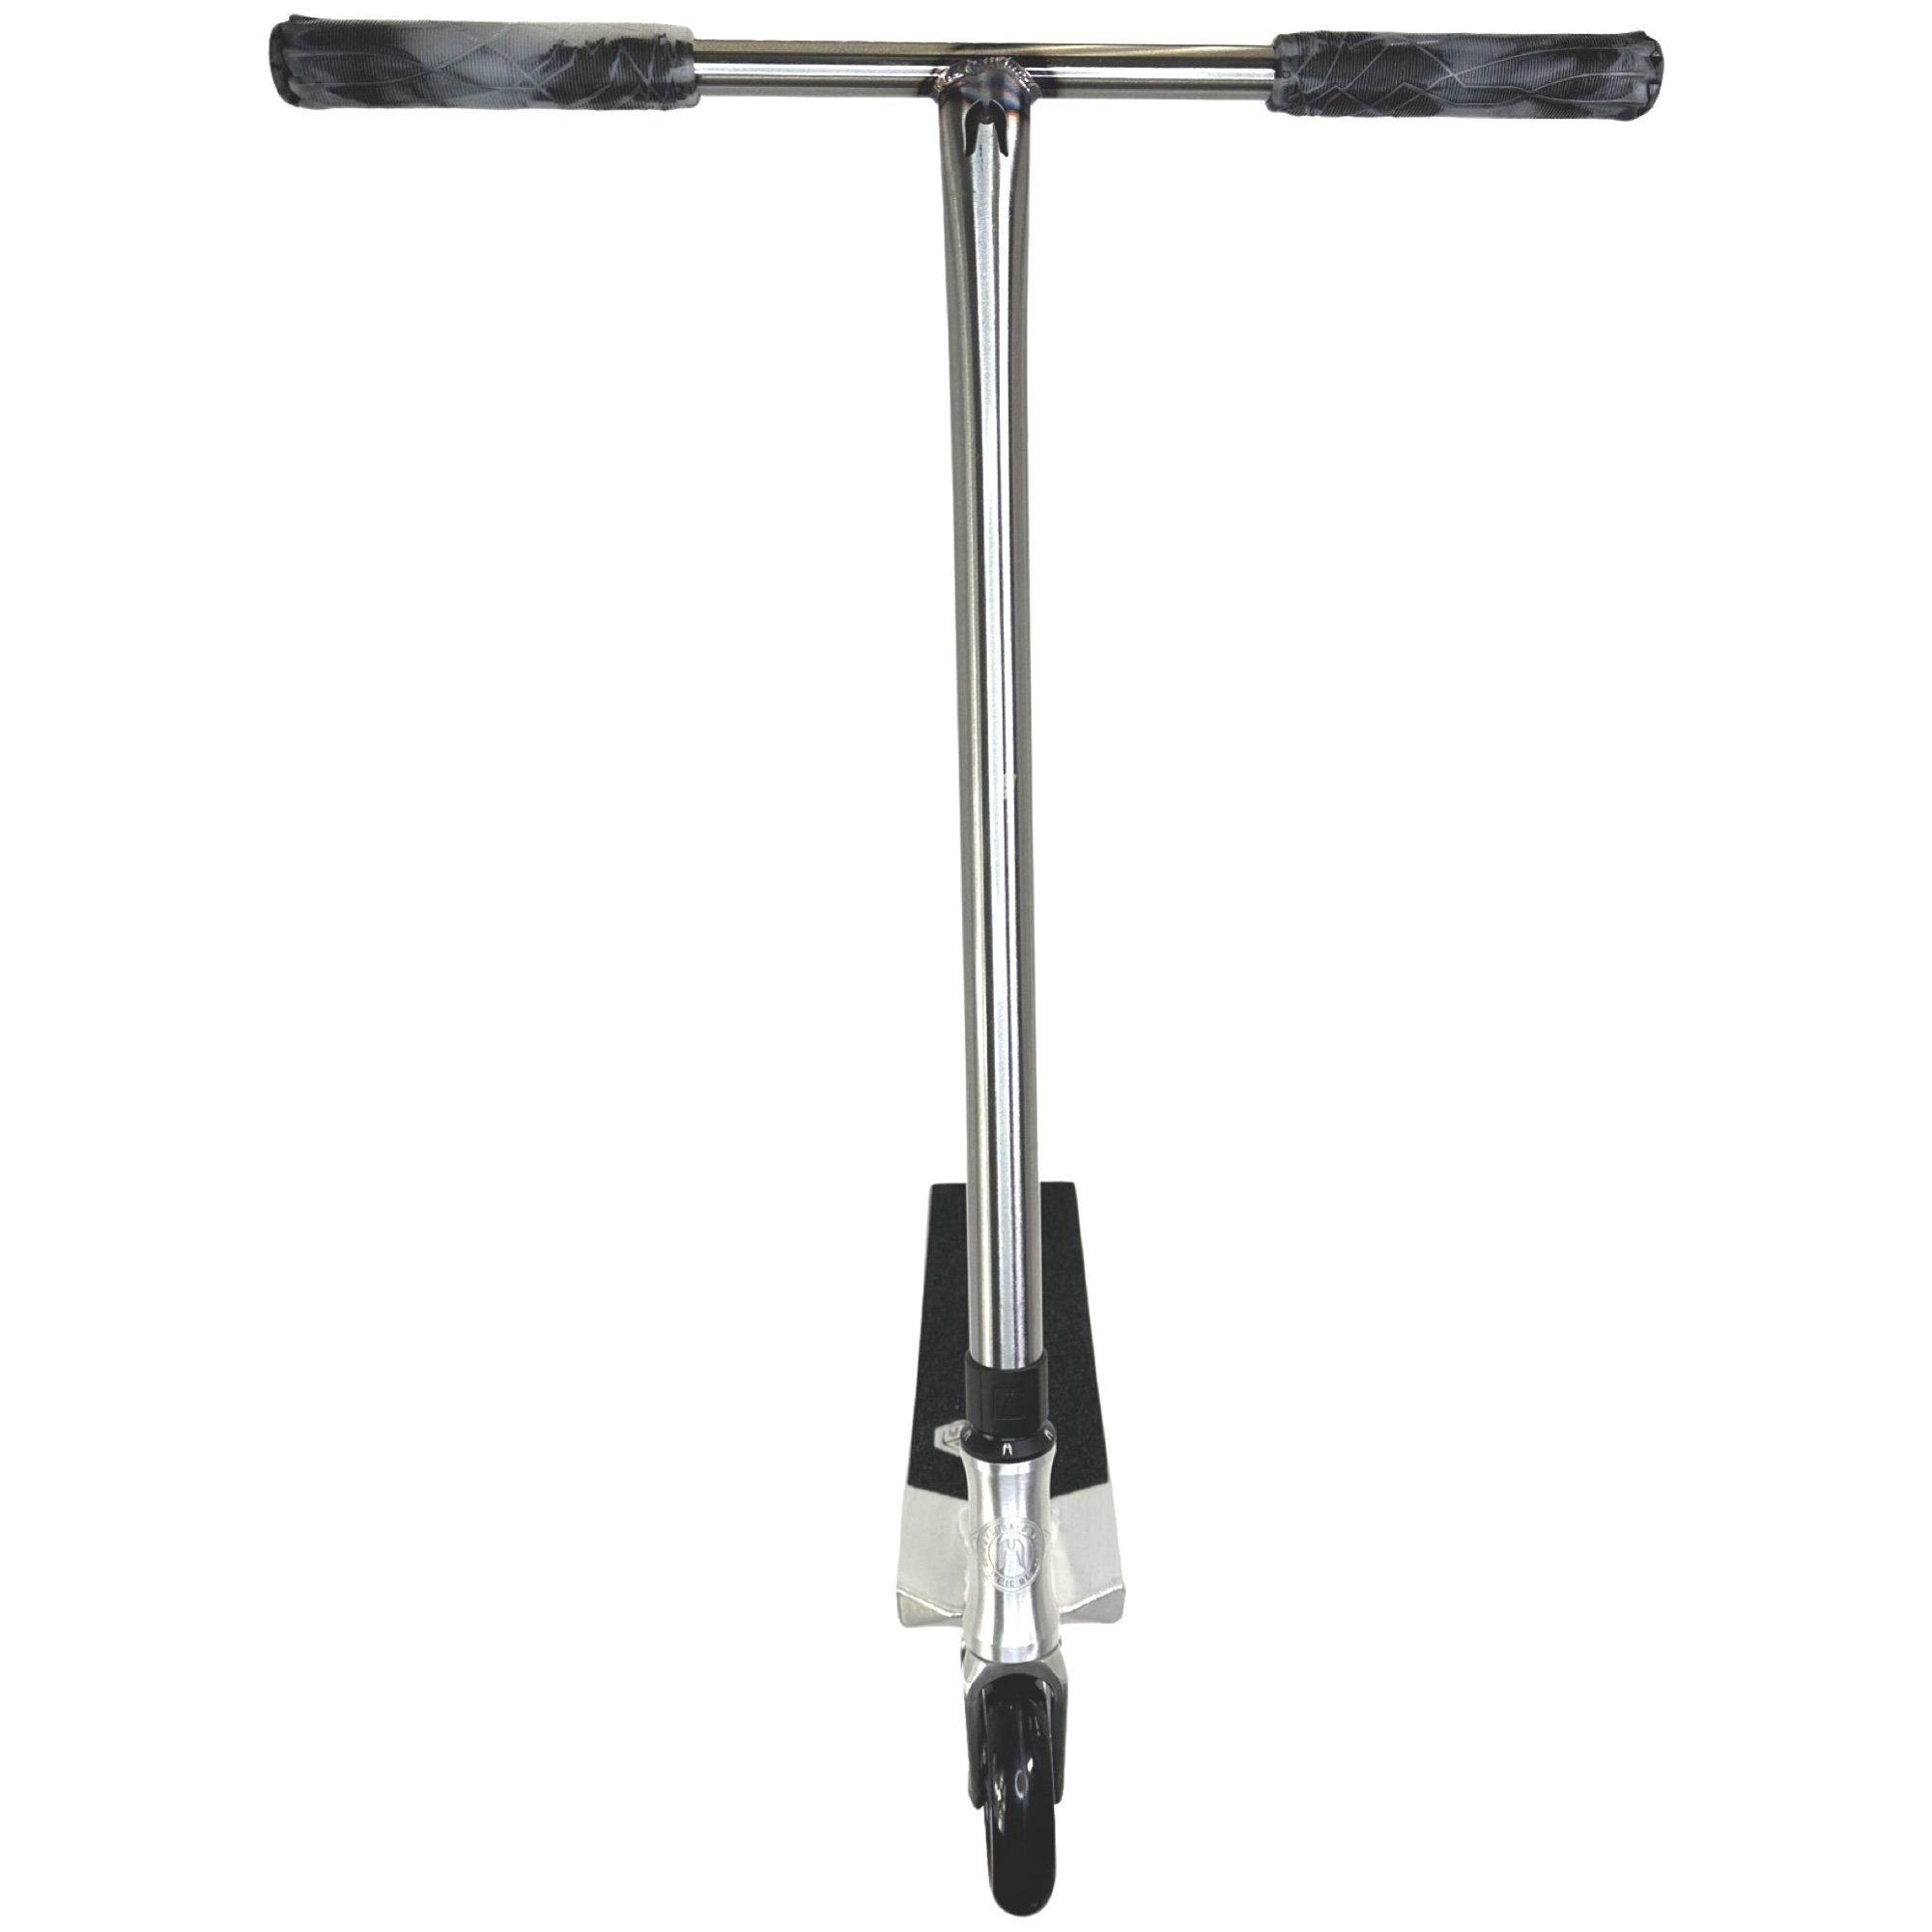 Silber Stuntscooter Ethic Stunt-Scooter 3,4kg DTC Pandora L Ethic DTC H=90cm